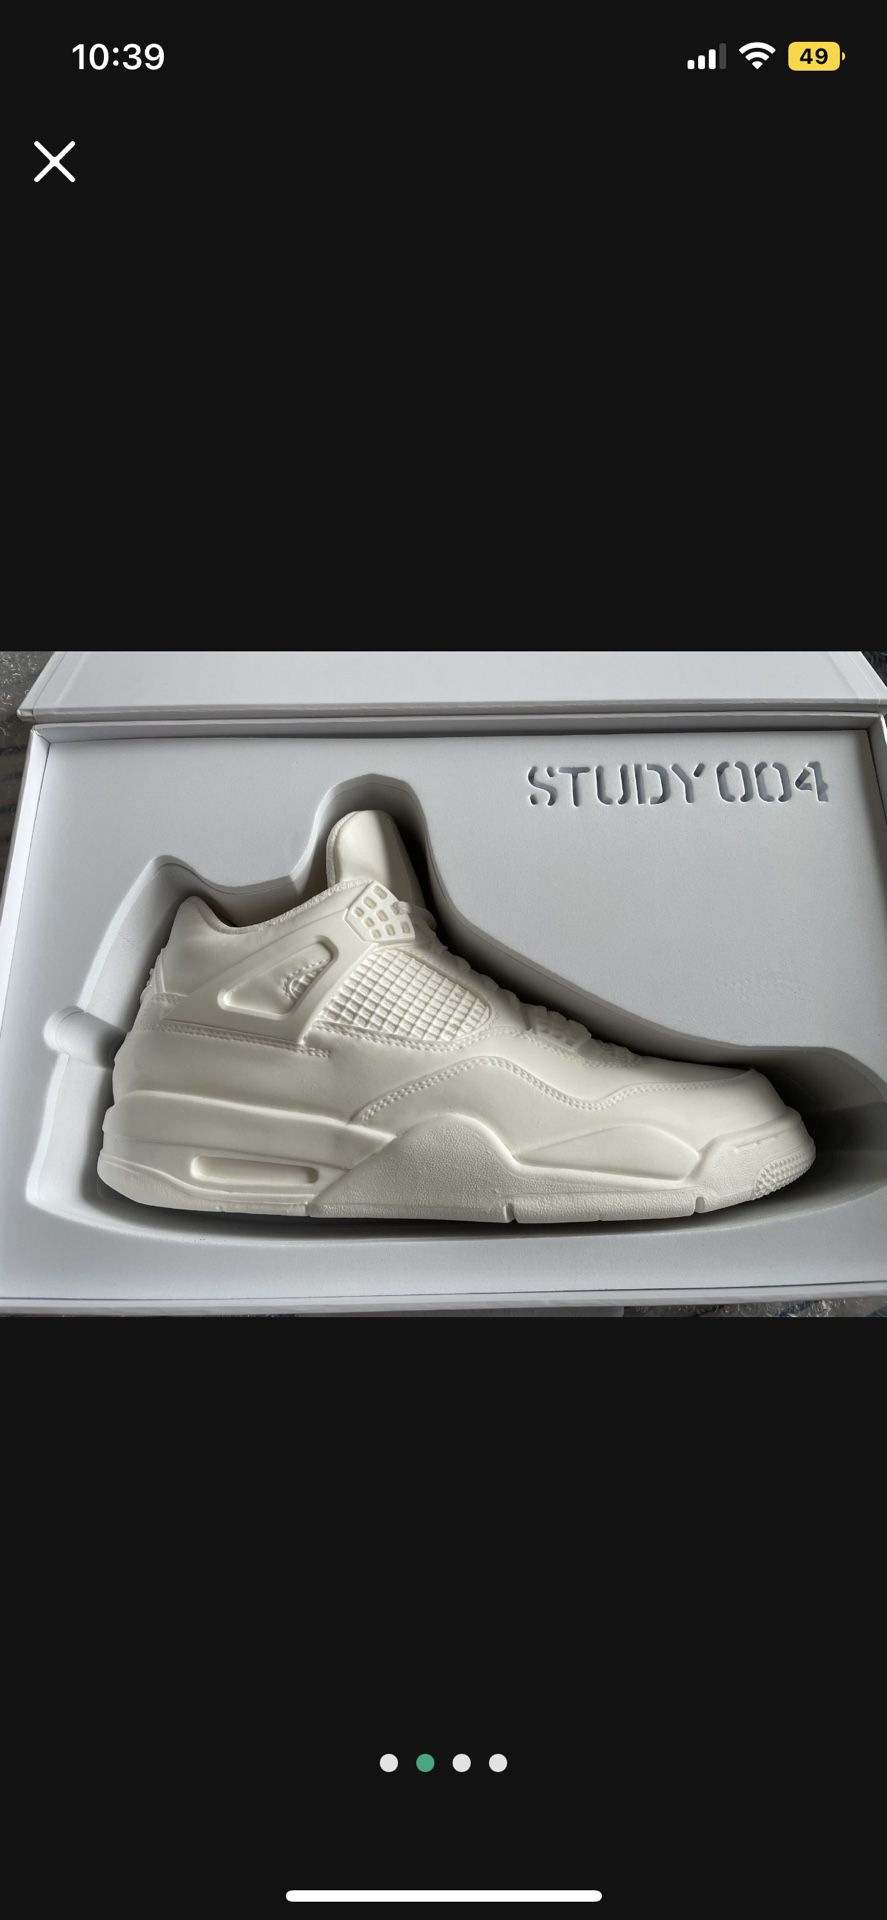 Matthew Senna Study 004 Sculpture White Resin Jordan 4 . Opened Box For Pictures But Never Used Or Displayed . 